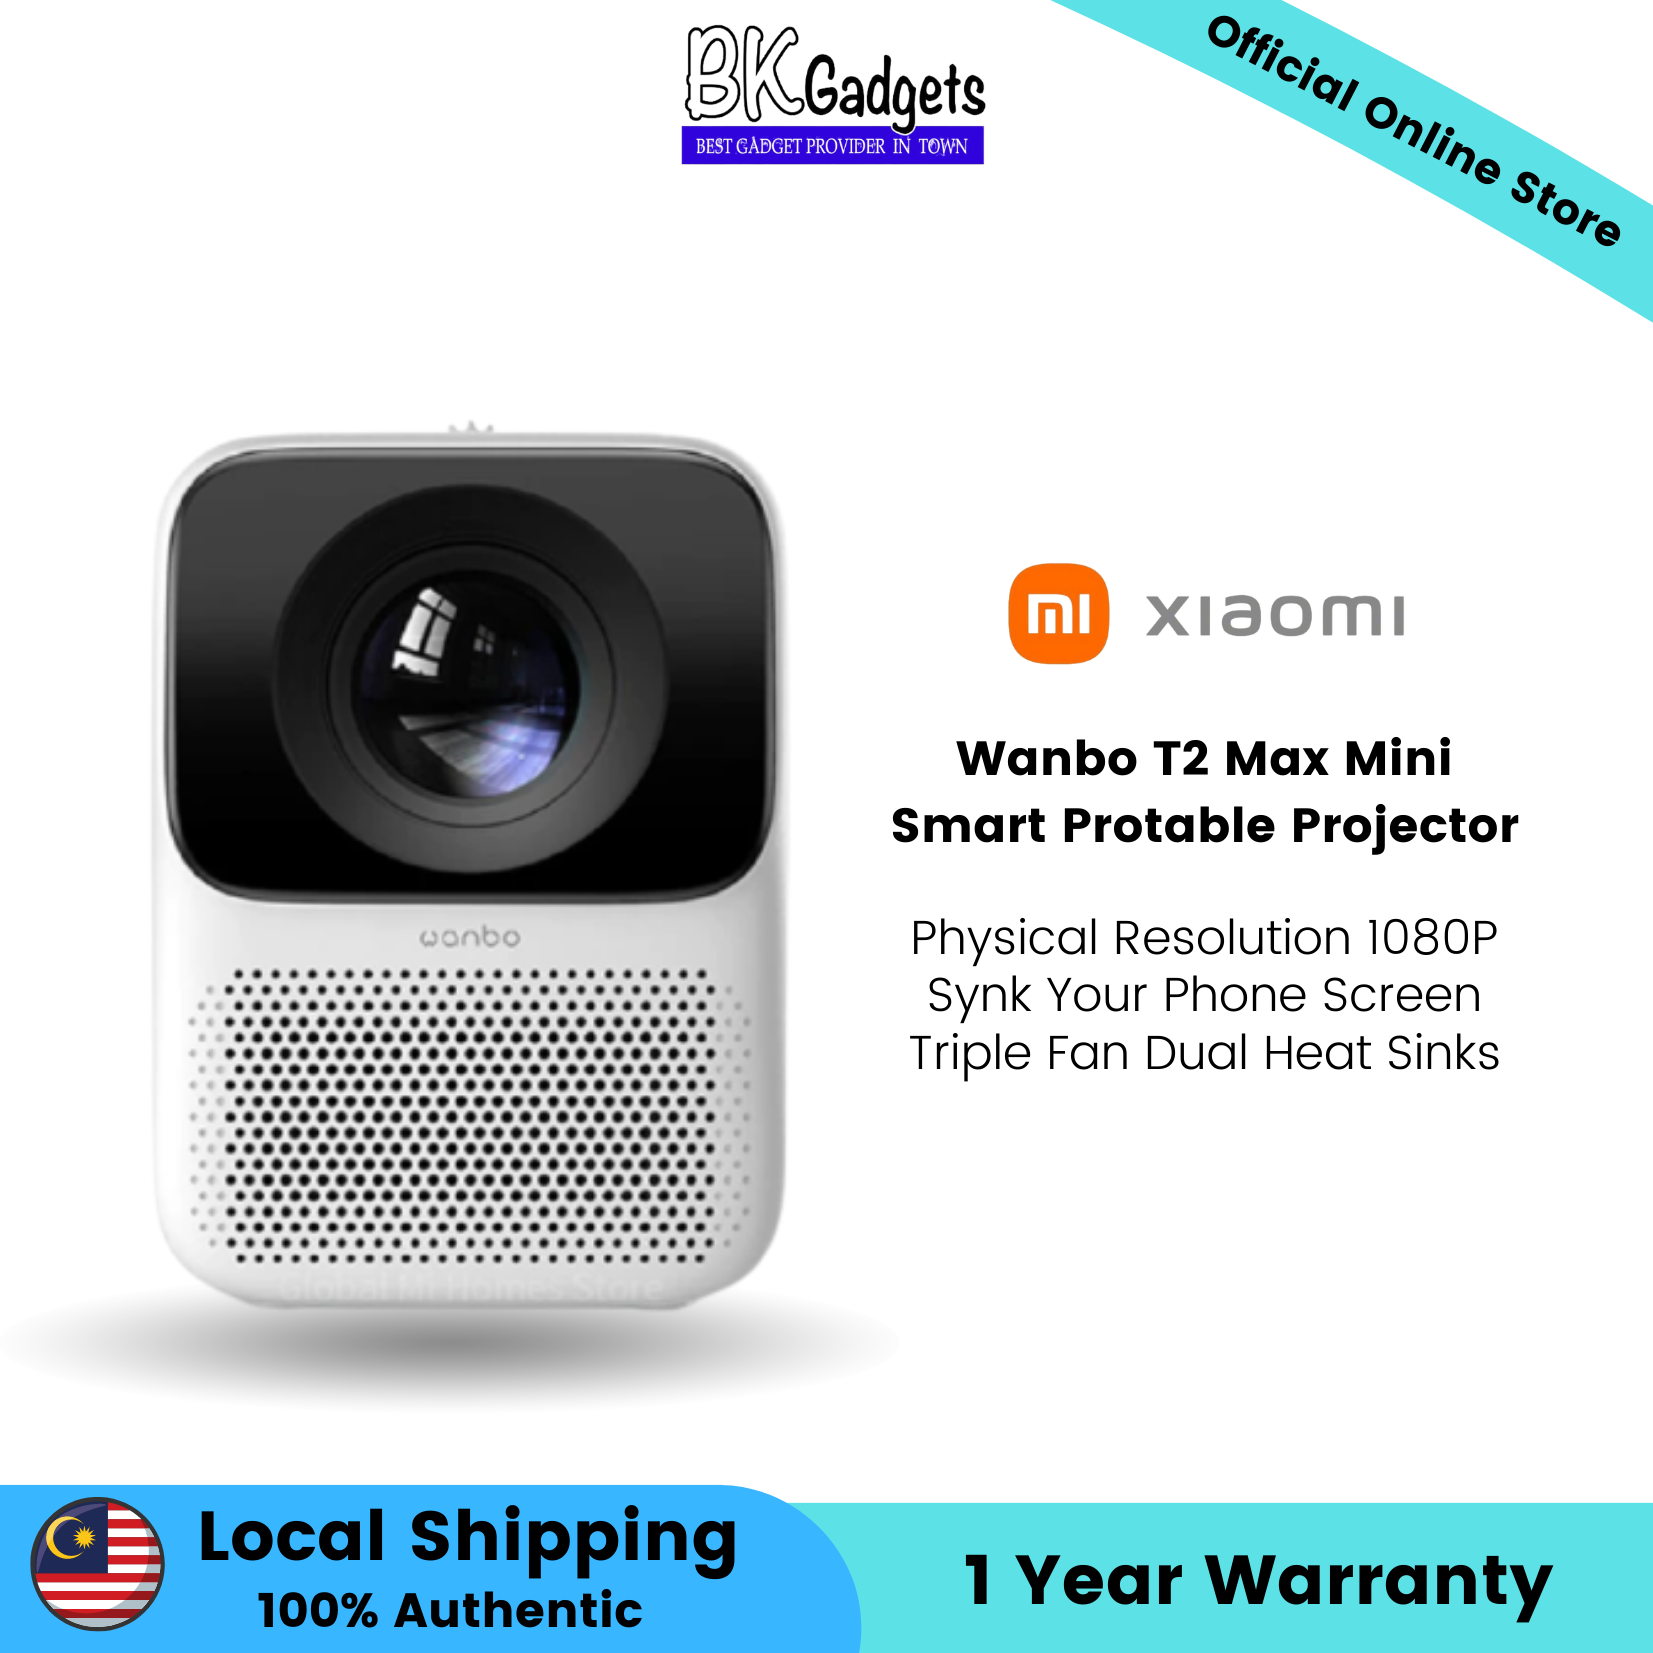 Wanbo T2 Max Mini Smart Portable Projector | Physical Resolution 1080P | Sync Your Phone Screen | Triple Fan Dual Heat Sinks